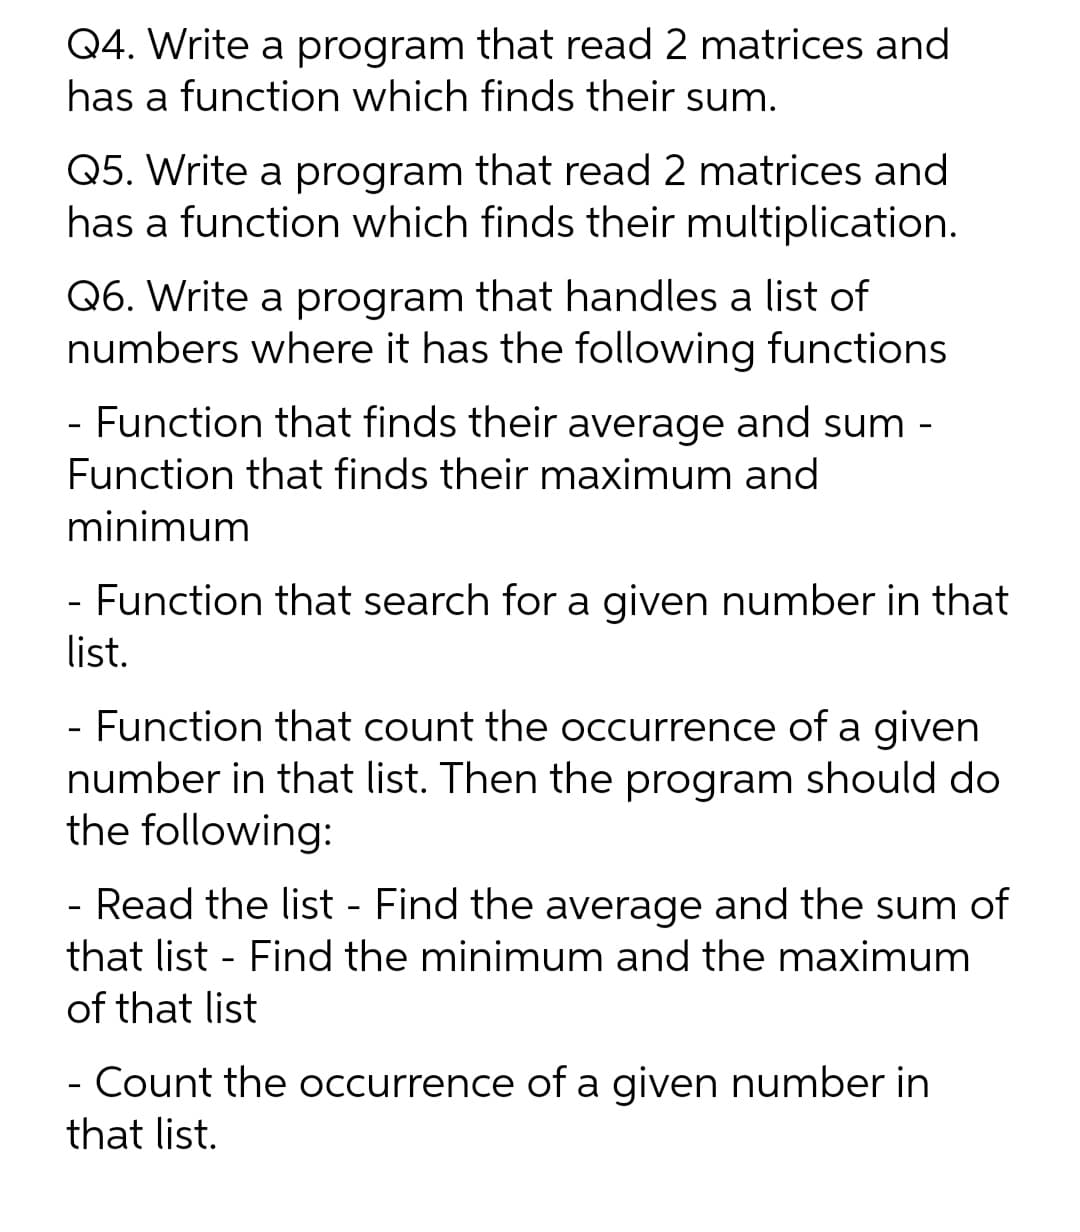 Q4. Write a program that read 2 matrices and
has a function which finds their sum.
Q5. Write a program that read 2 matrices and
has a function which finds their multiplication.
Q6. Write a program that handles a list of
numbers where it has the following functions
- Function that finds their average and sum -
Function that finds their maximum and
minimum
- Function that search for a given number in that
list.
- Function that count the occurrence of a given
number in that list. Then the program should do
the following:
- Read the list - Find the average and the sum of
that list - Find the minimum and the maximum
of that list
- Count the occurrence of a given number in
that list.
